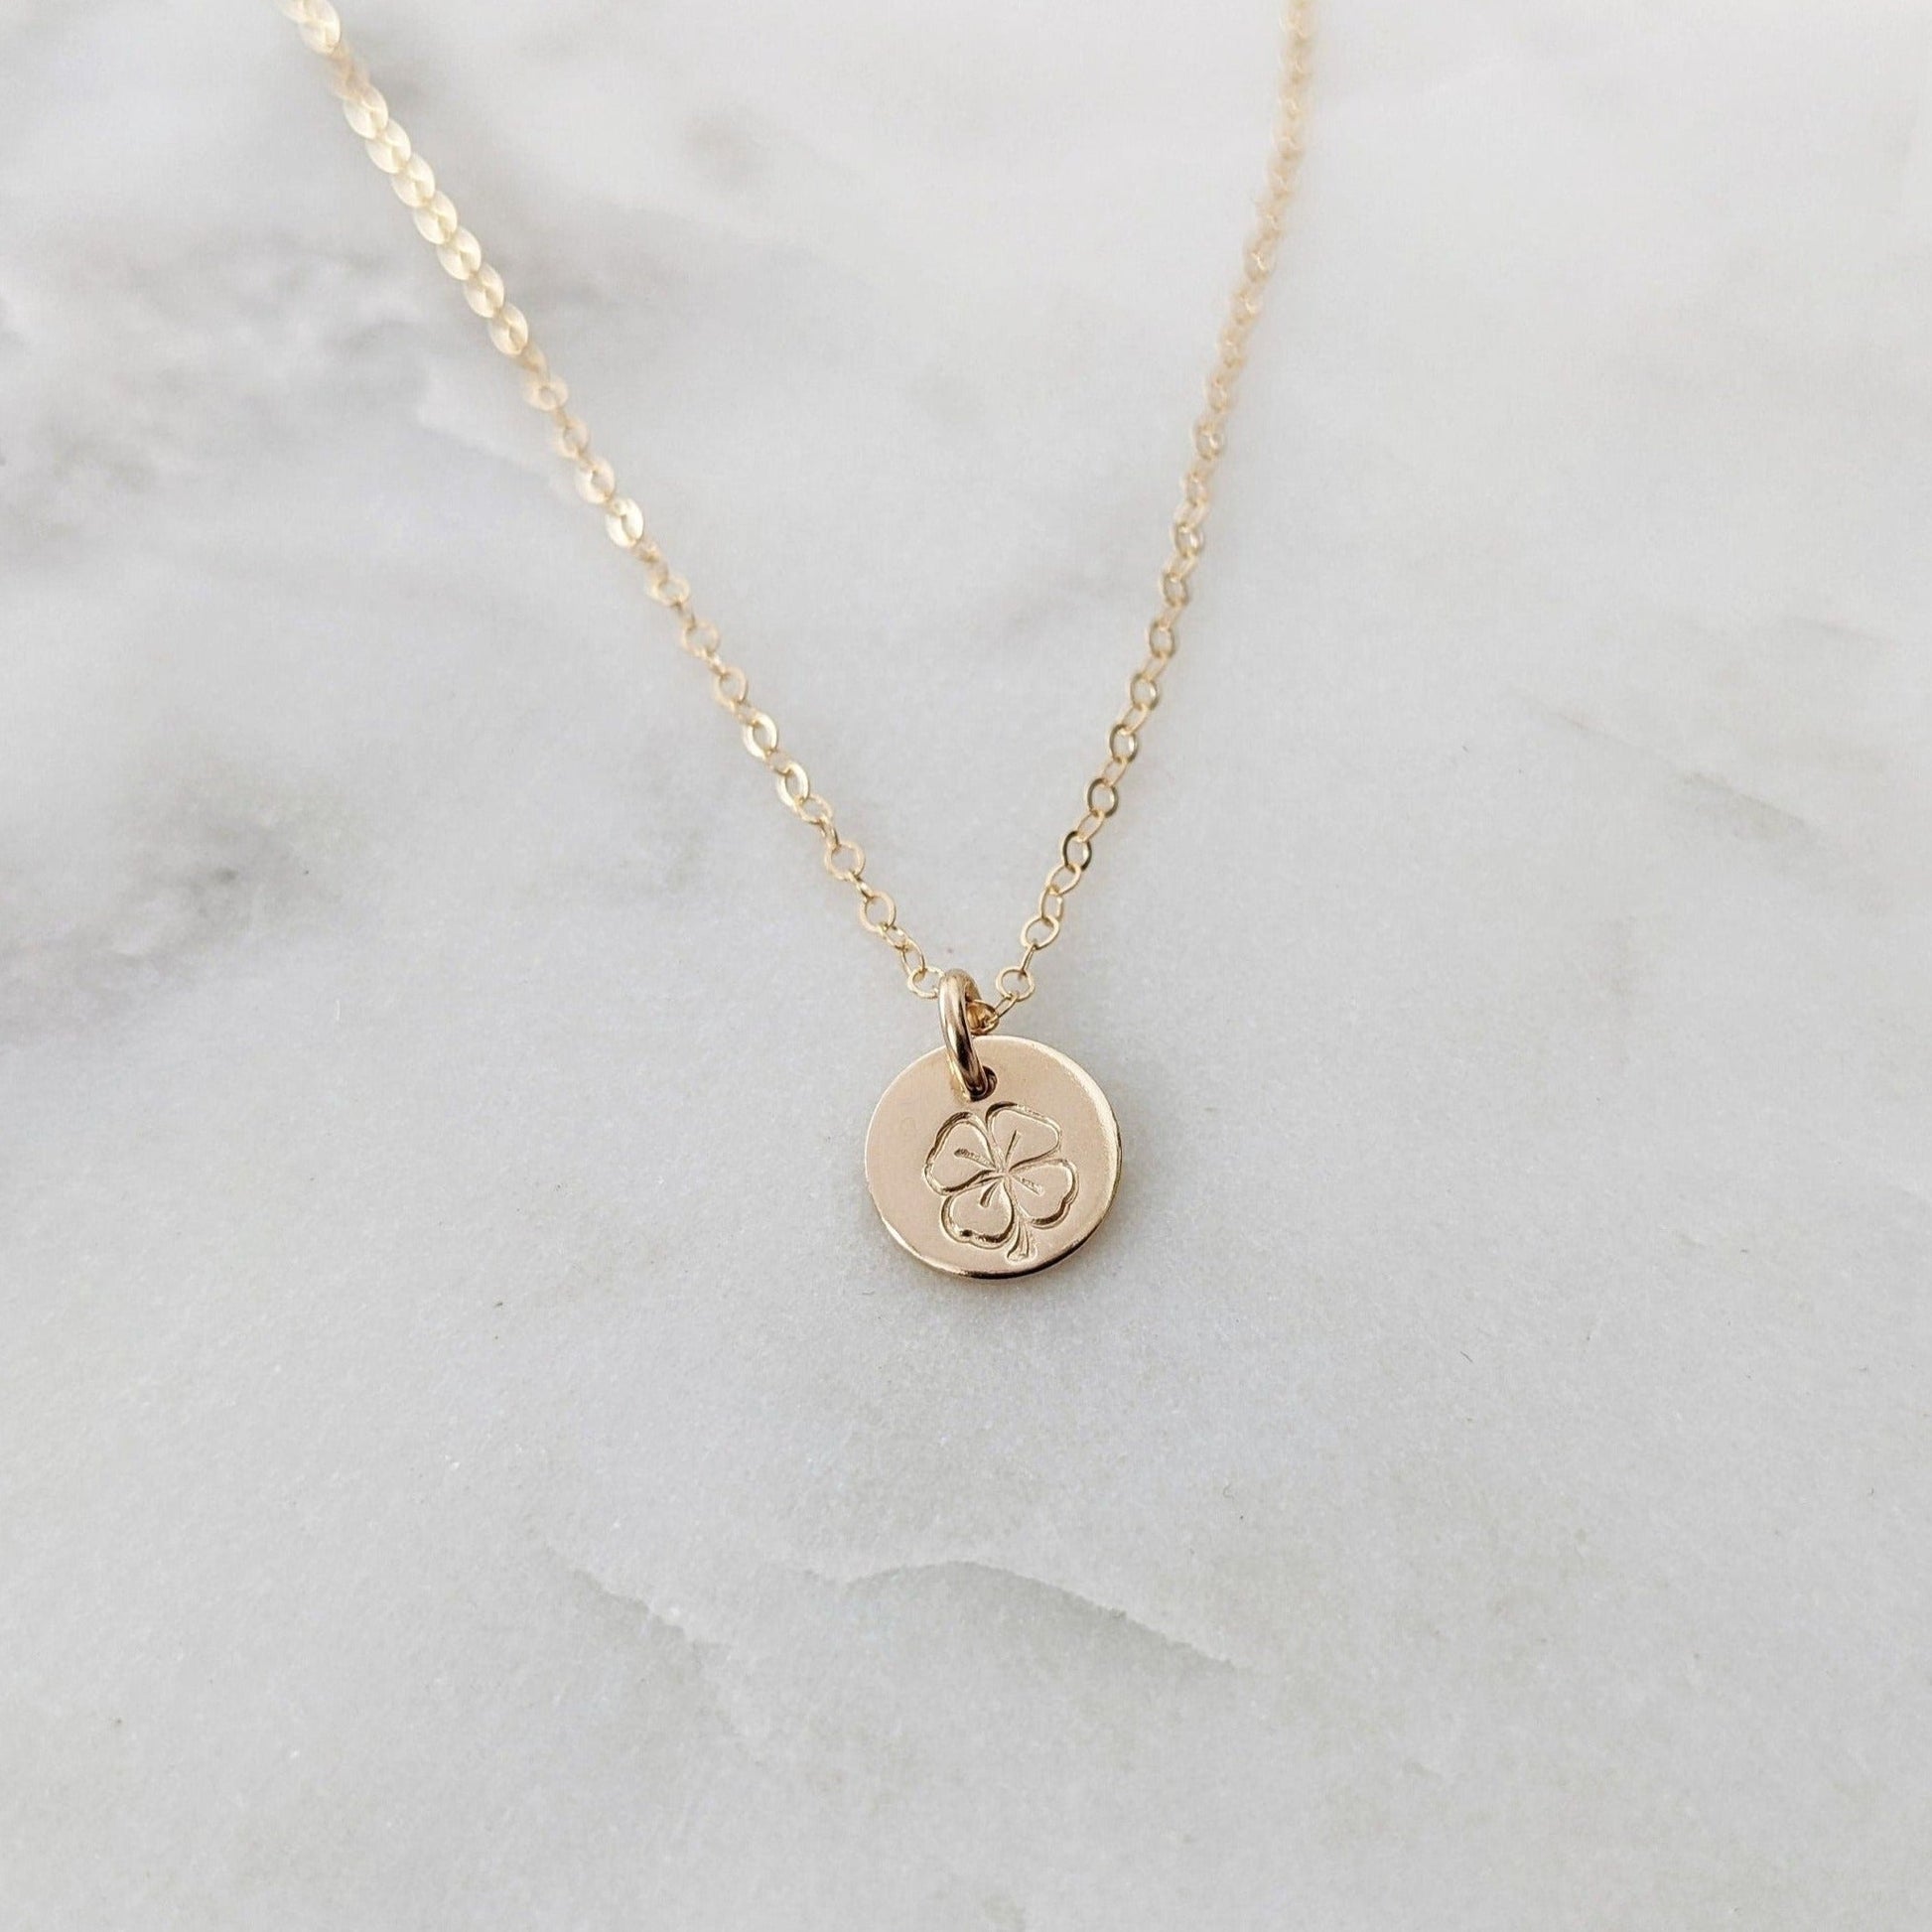 tiny gold filled disc with four leaf clover design